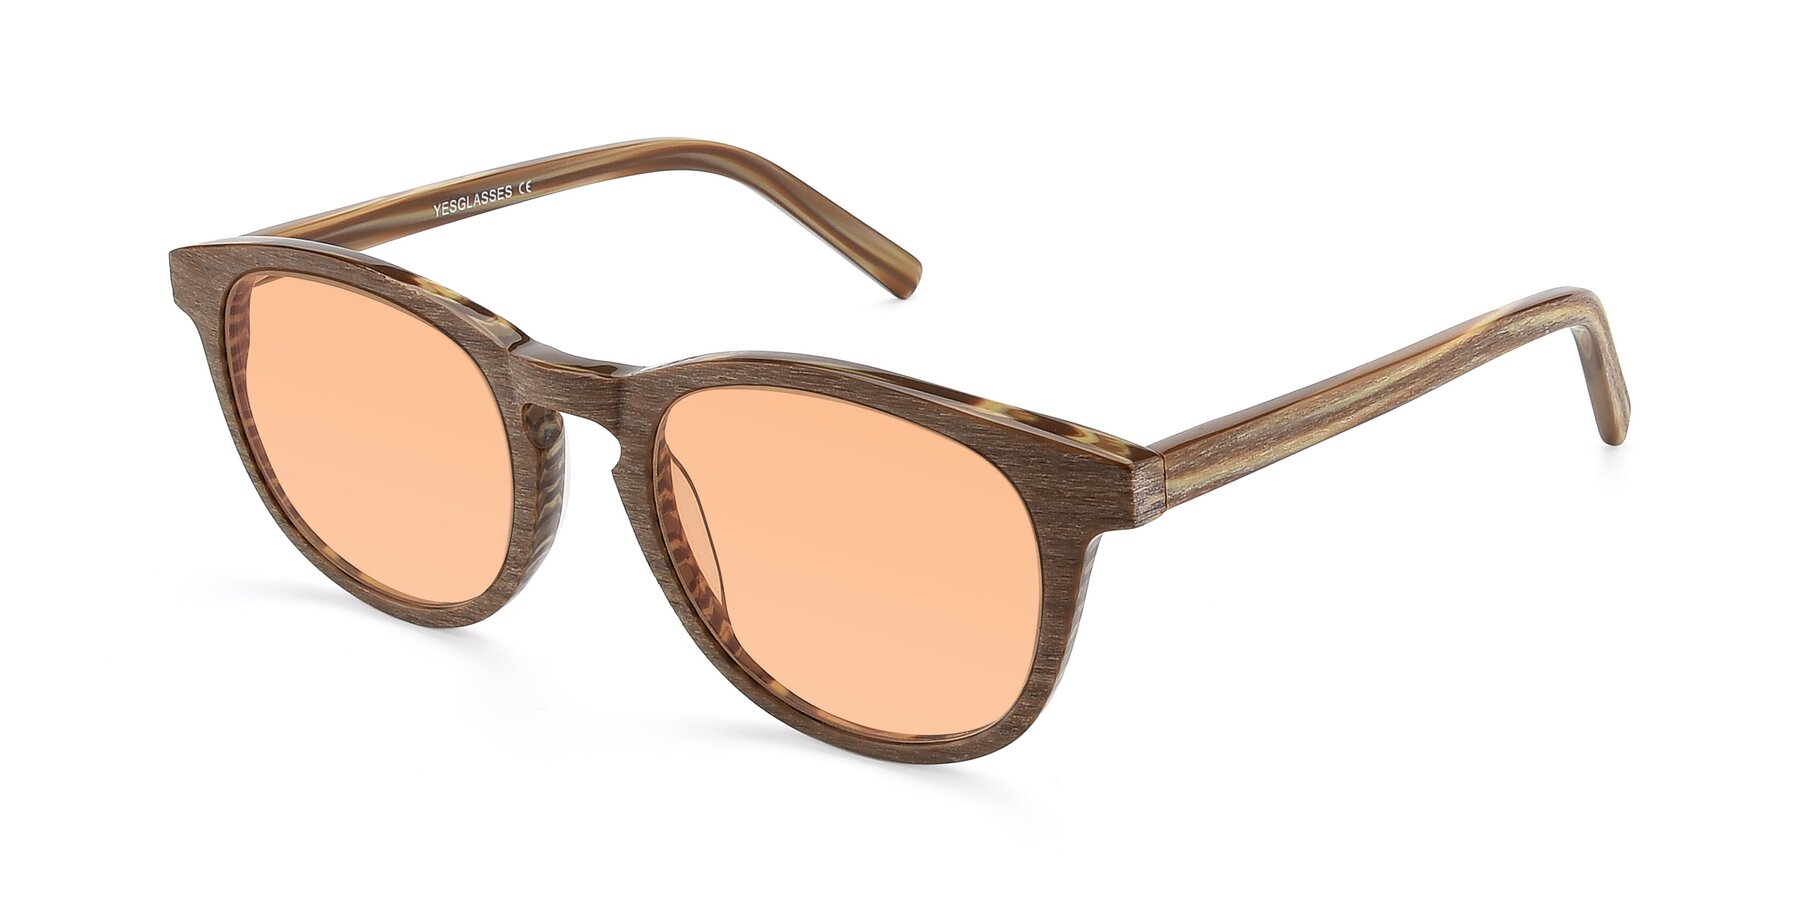 Angle of SR6044 in Brown-Wooden with Light Orange Tinted Lenses